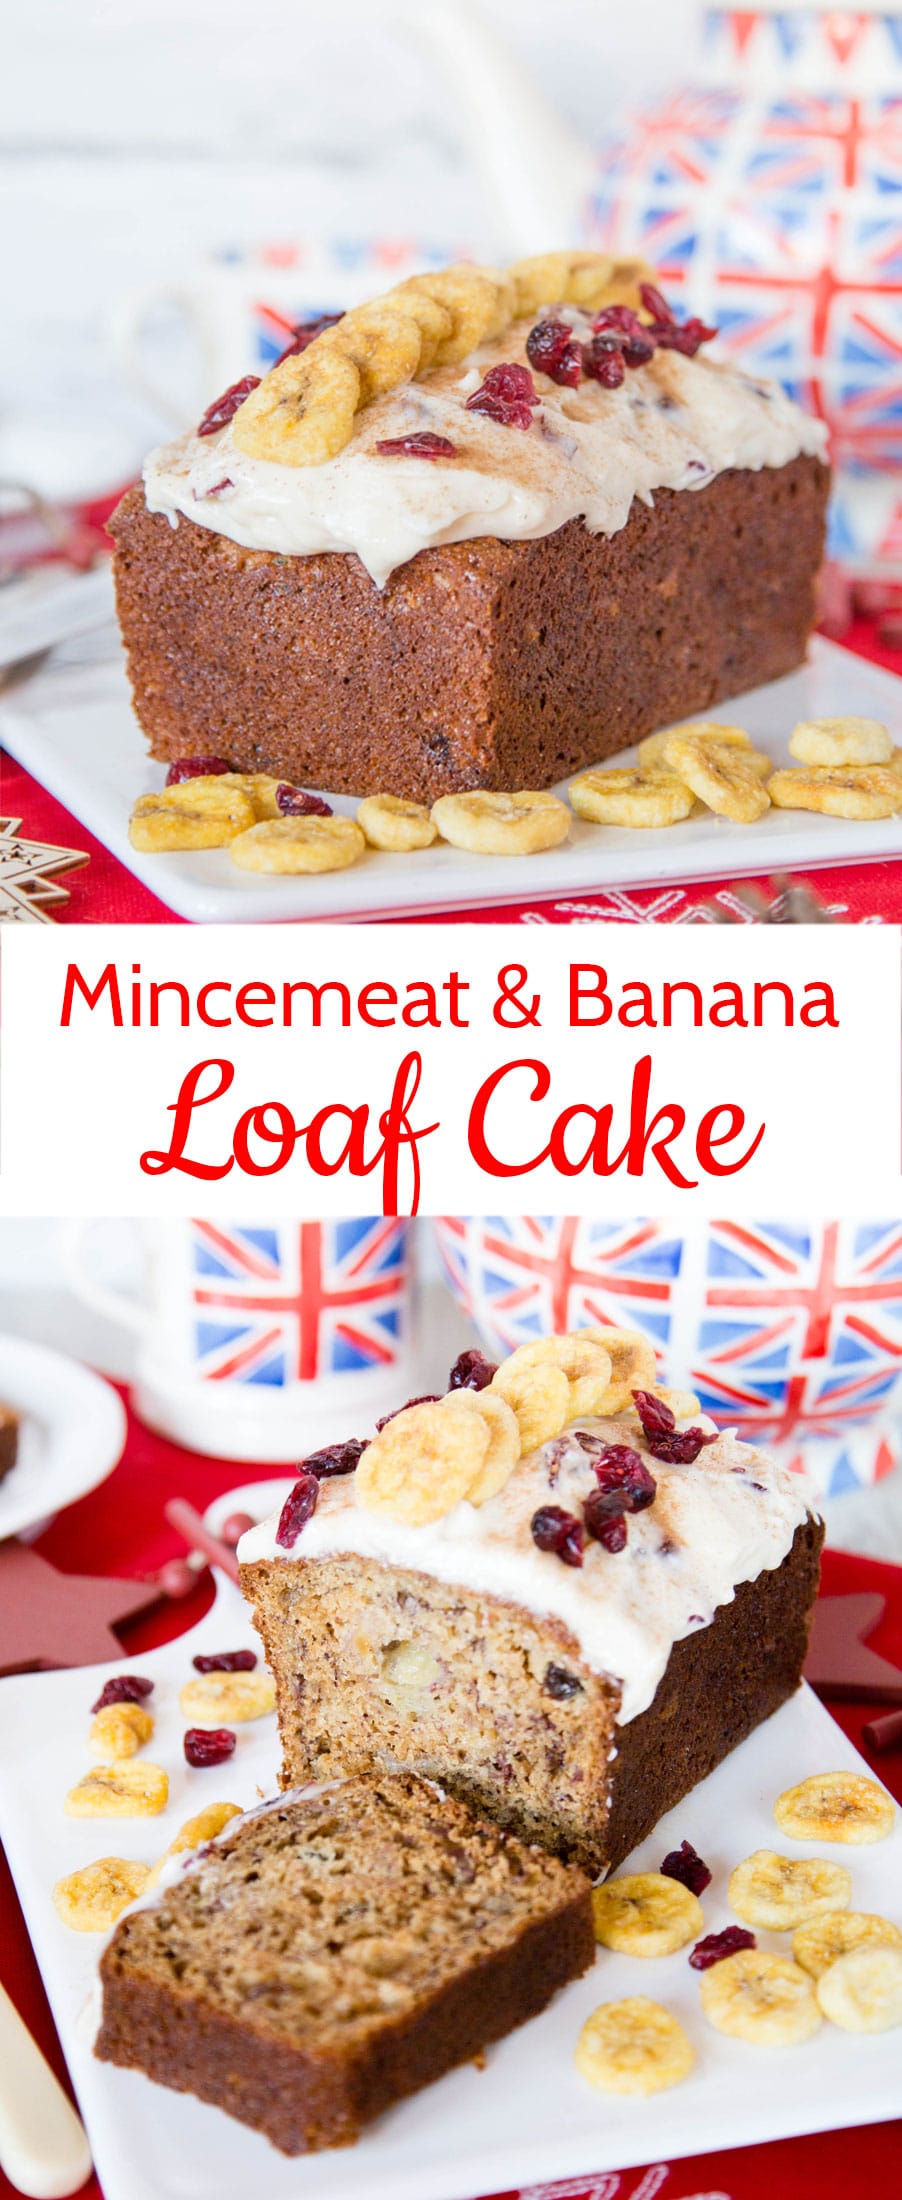 This banana & mincemeat loaf cake has no added fat, and is topped with a cinnamon & cranberry cream cheese frosting and is delicious alternative to the traditional Christmas cake